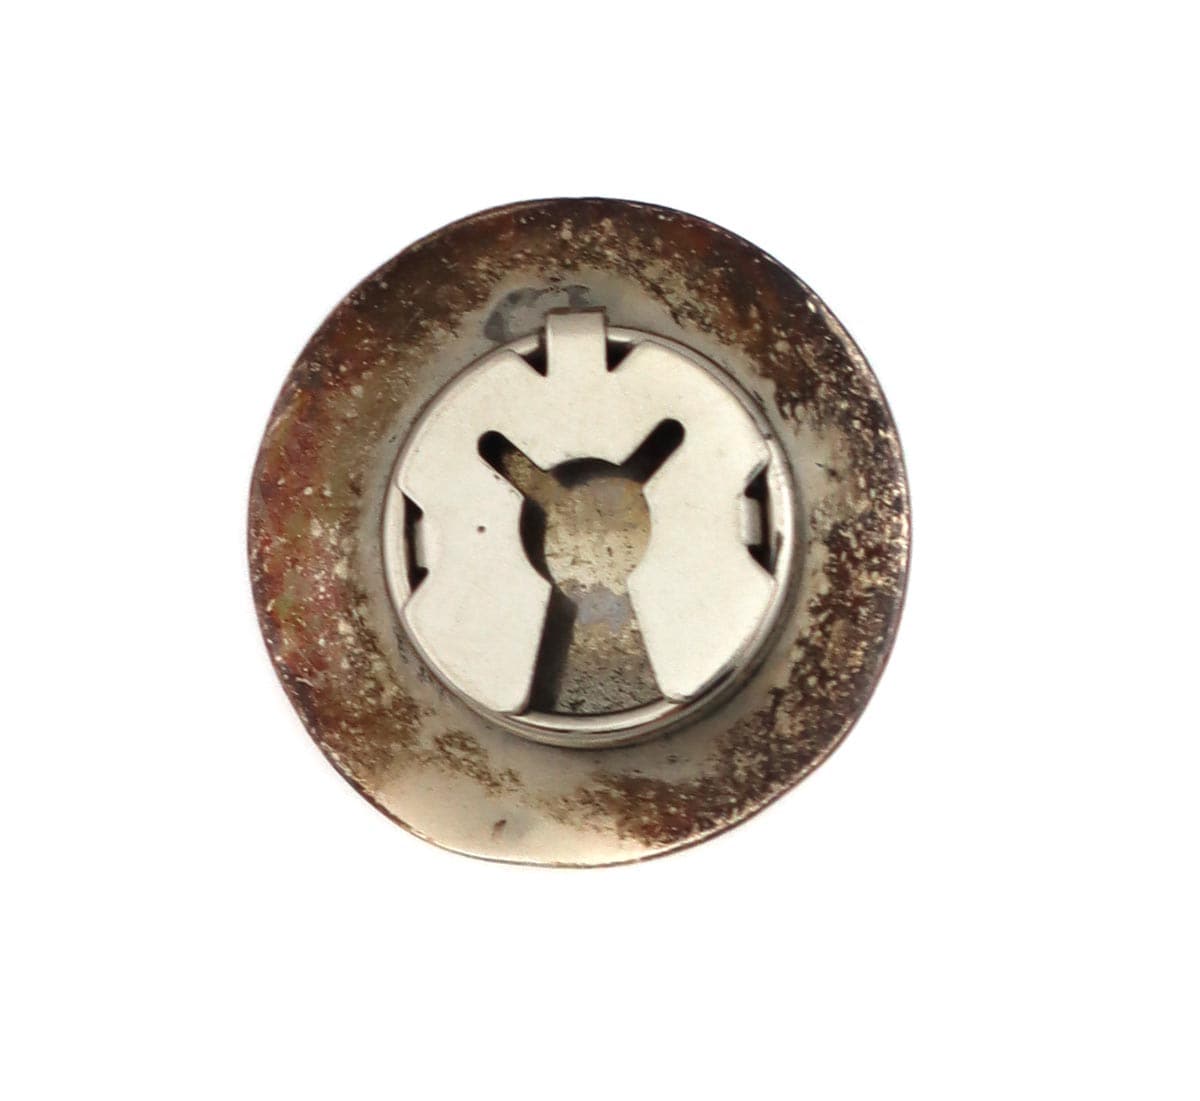 Hopi Silver Button Cover with Stamped Design c. 1940-50s, 1.125" diameter (J14165-05)